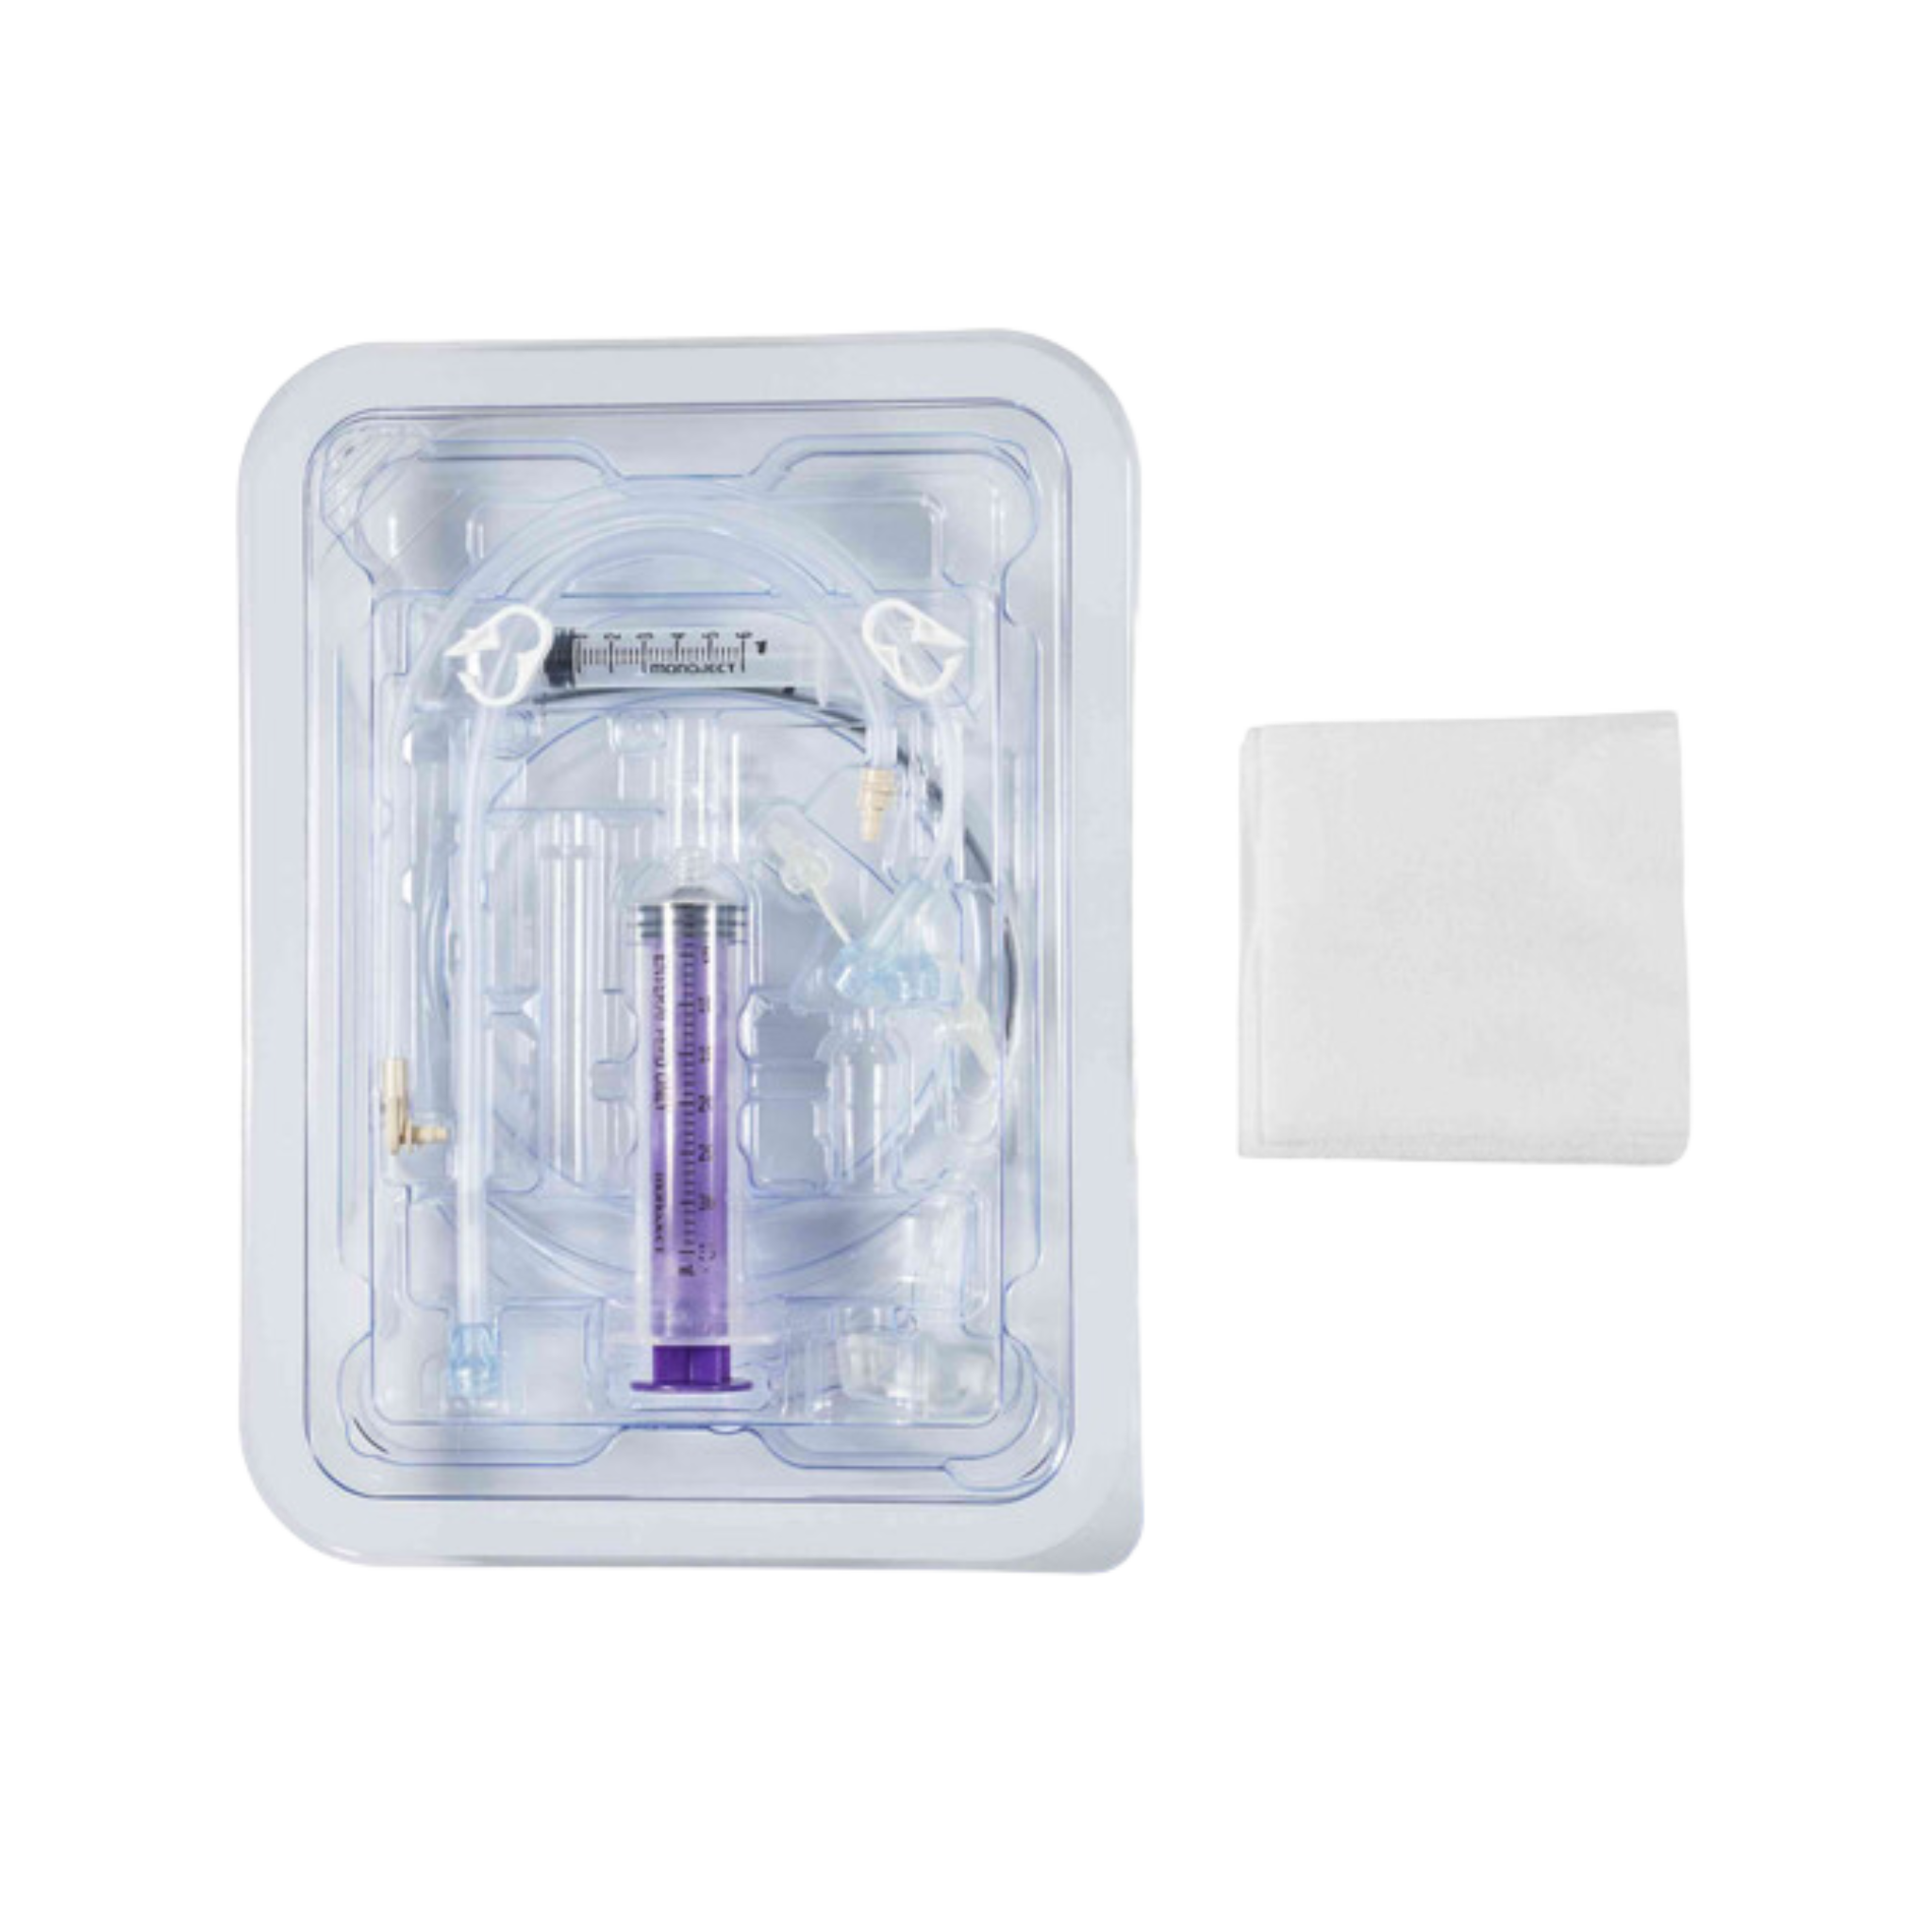 Avanos 14Fr Mic-Key Low-Profile Gastric-jejunal Feeding Tube With Enfit Extension Sets - All Sizes